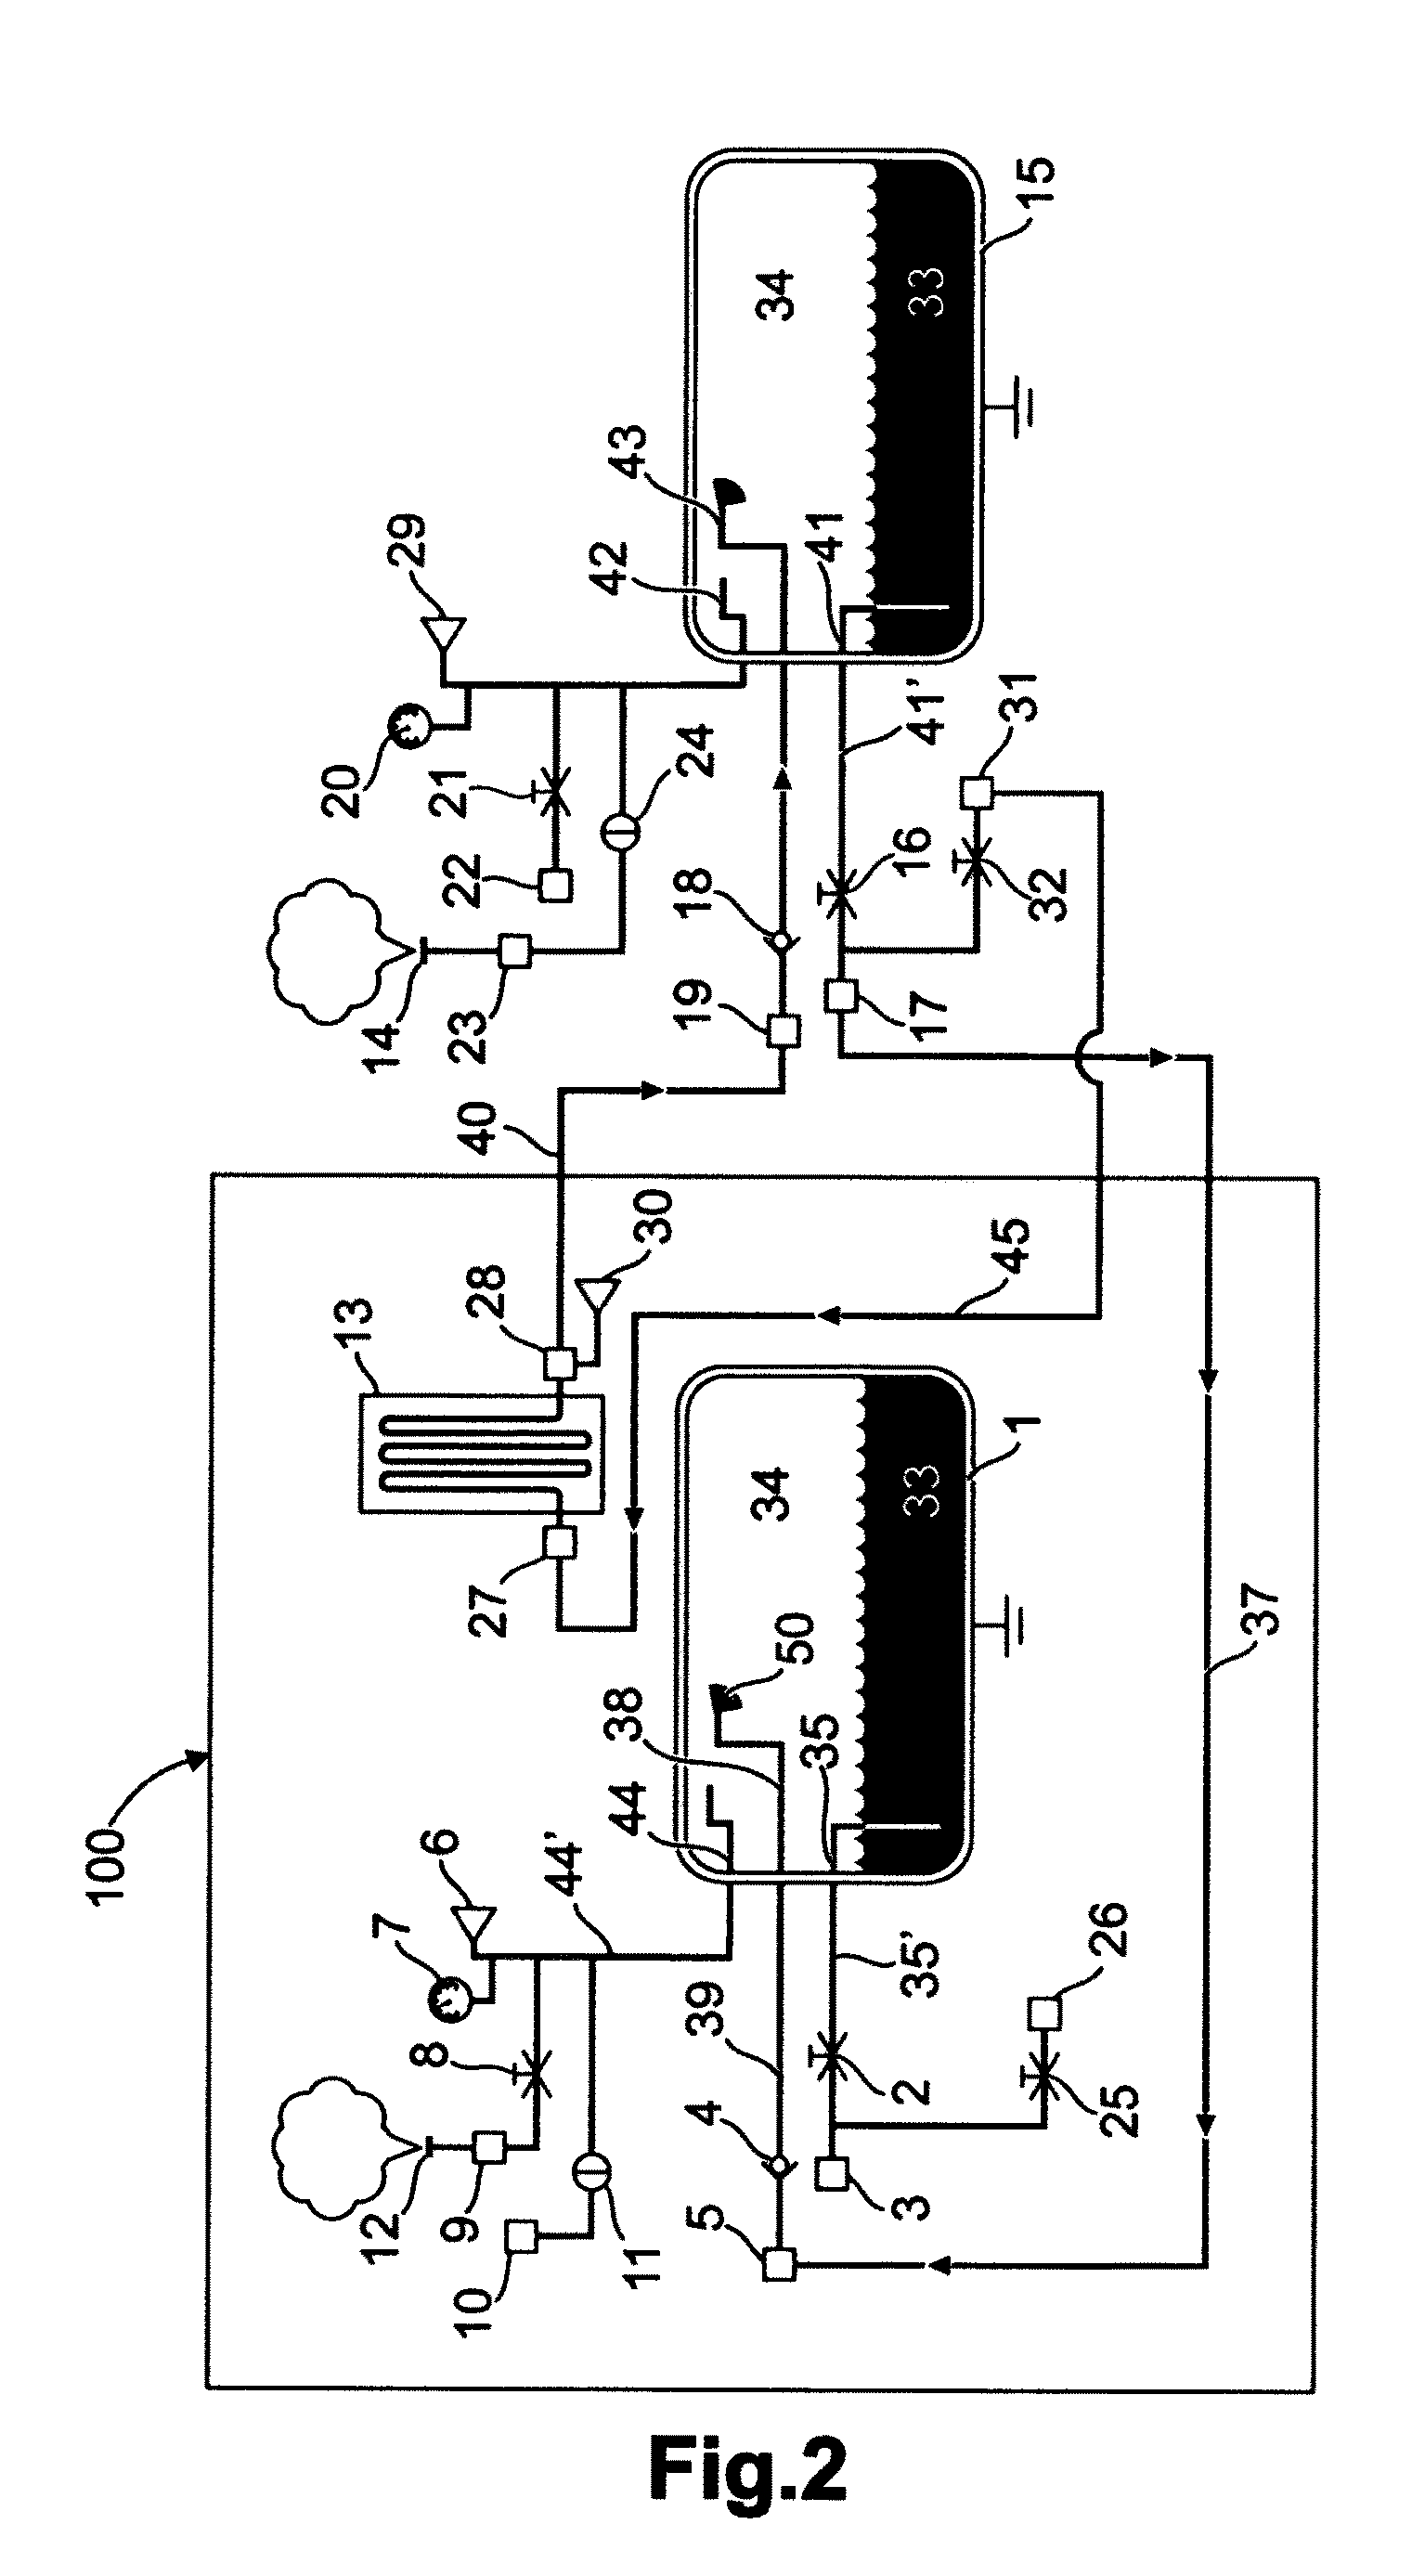 System for draining and refilling cryogenic fuel in a vehicle tank